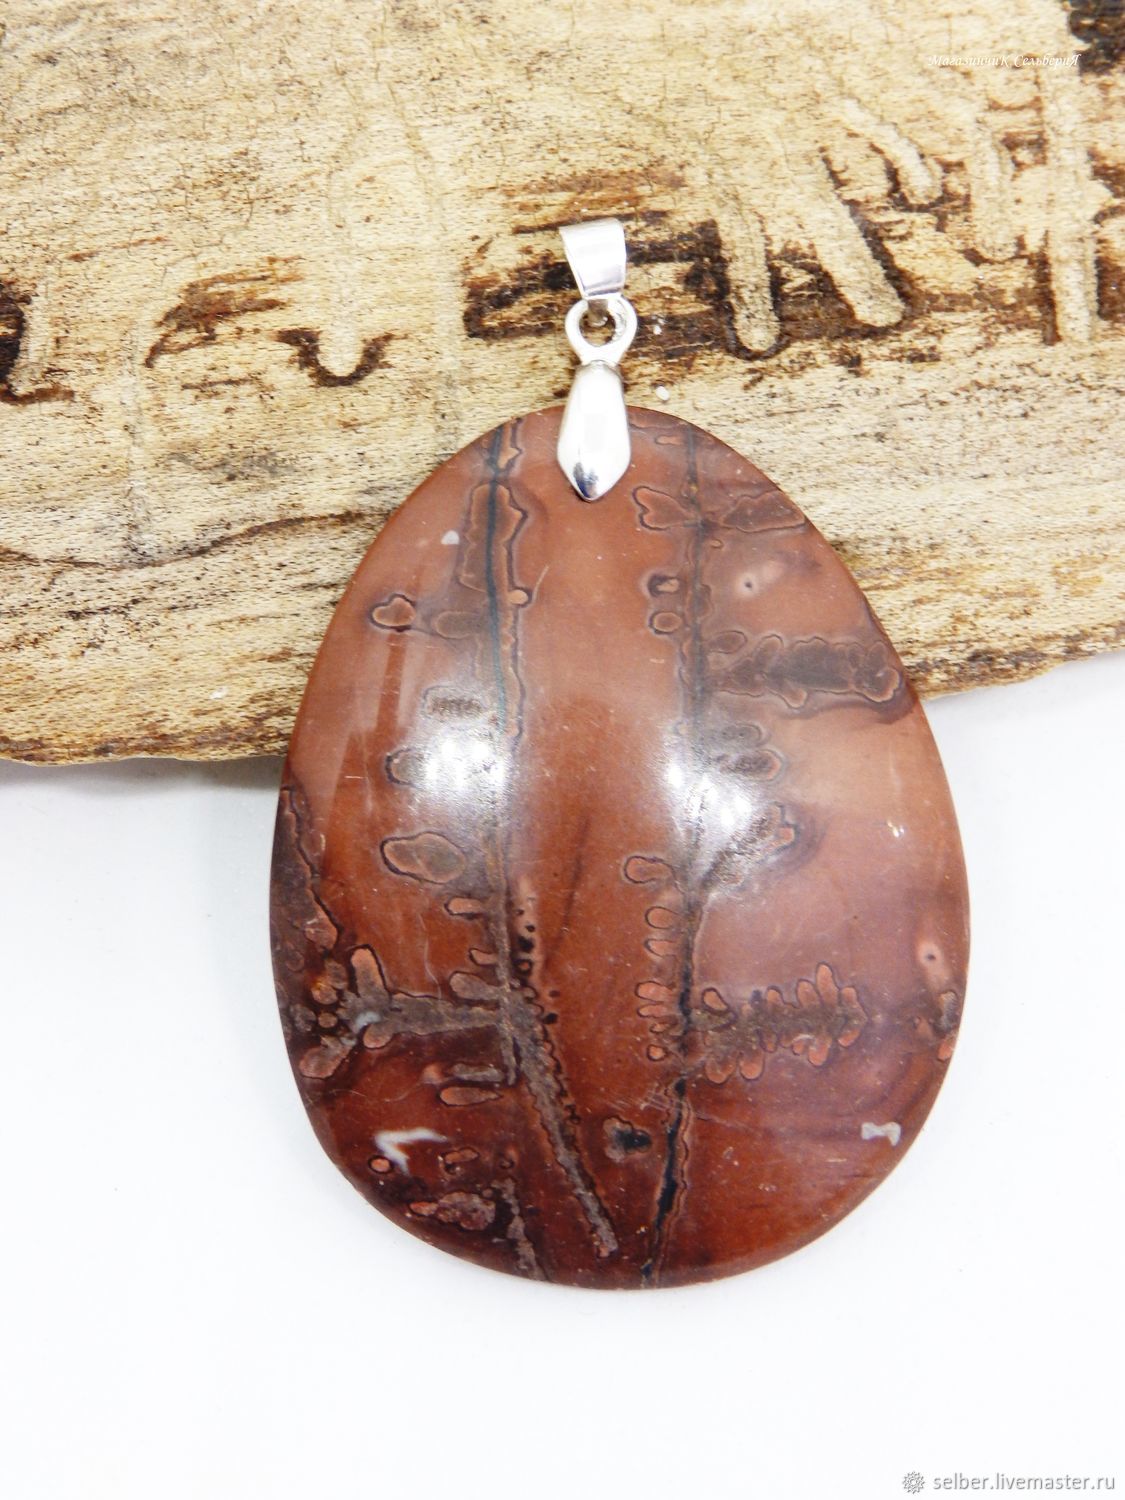 The pendant is made of siltstone Signs of the desert, Pendants, Gatchina,  Фото №1